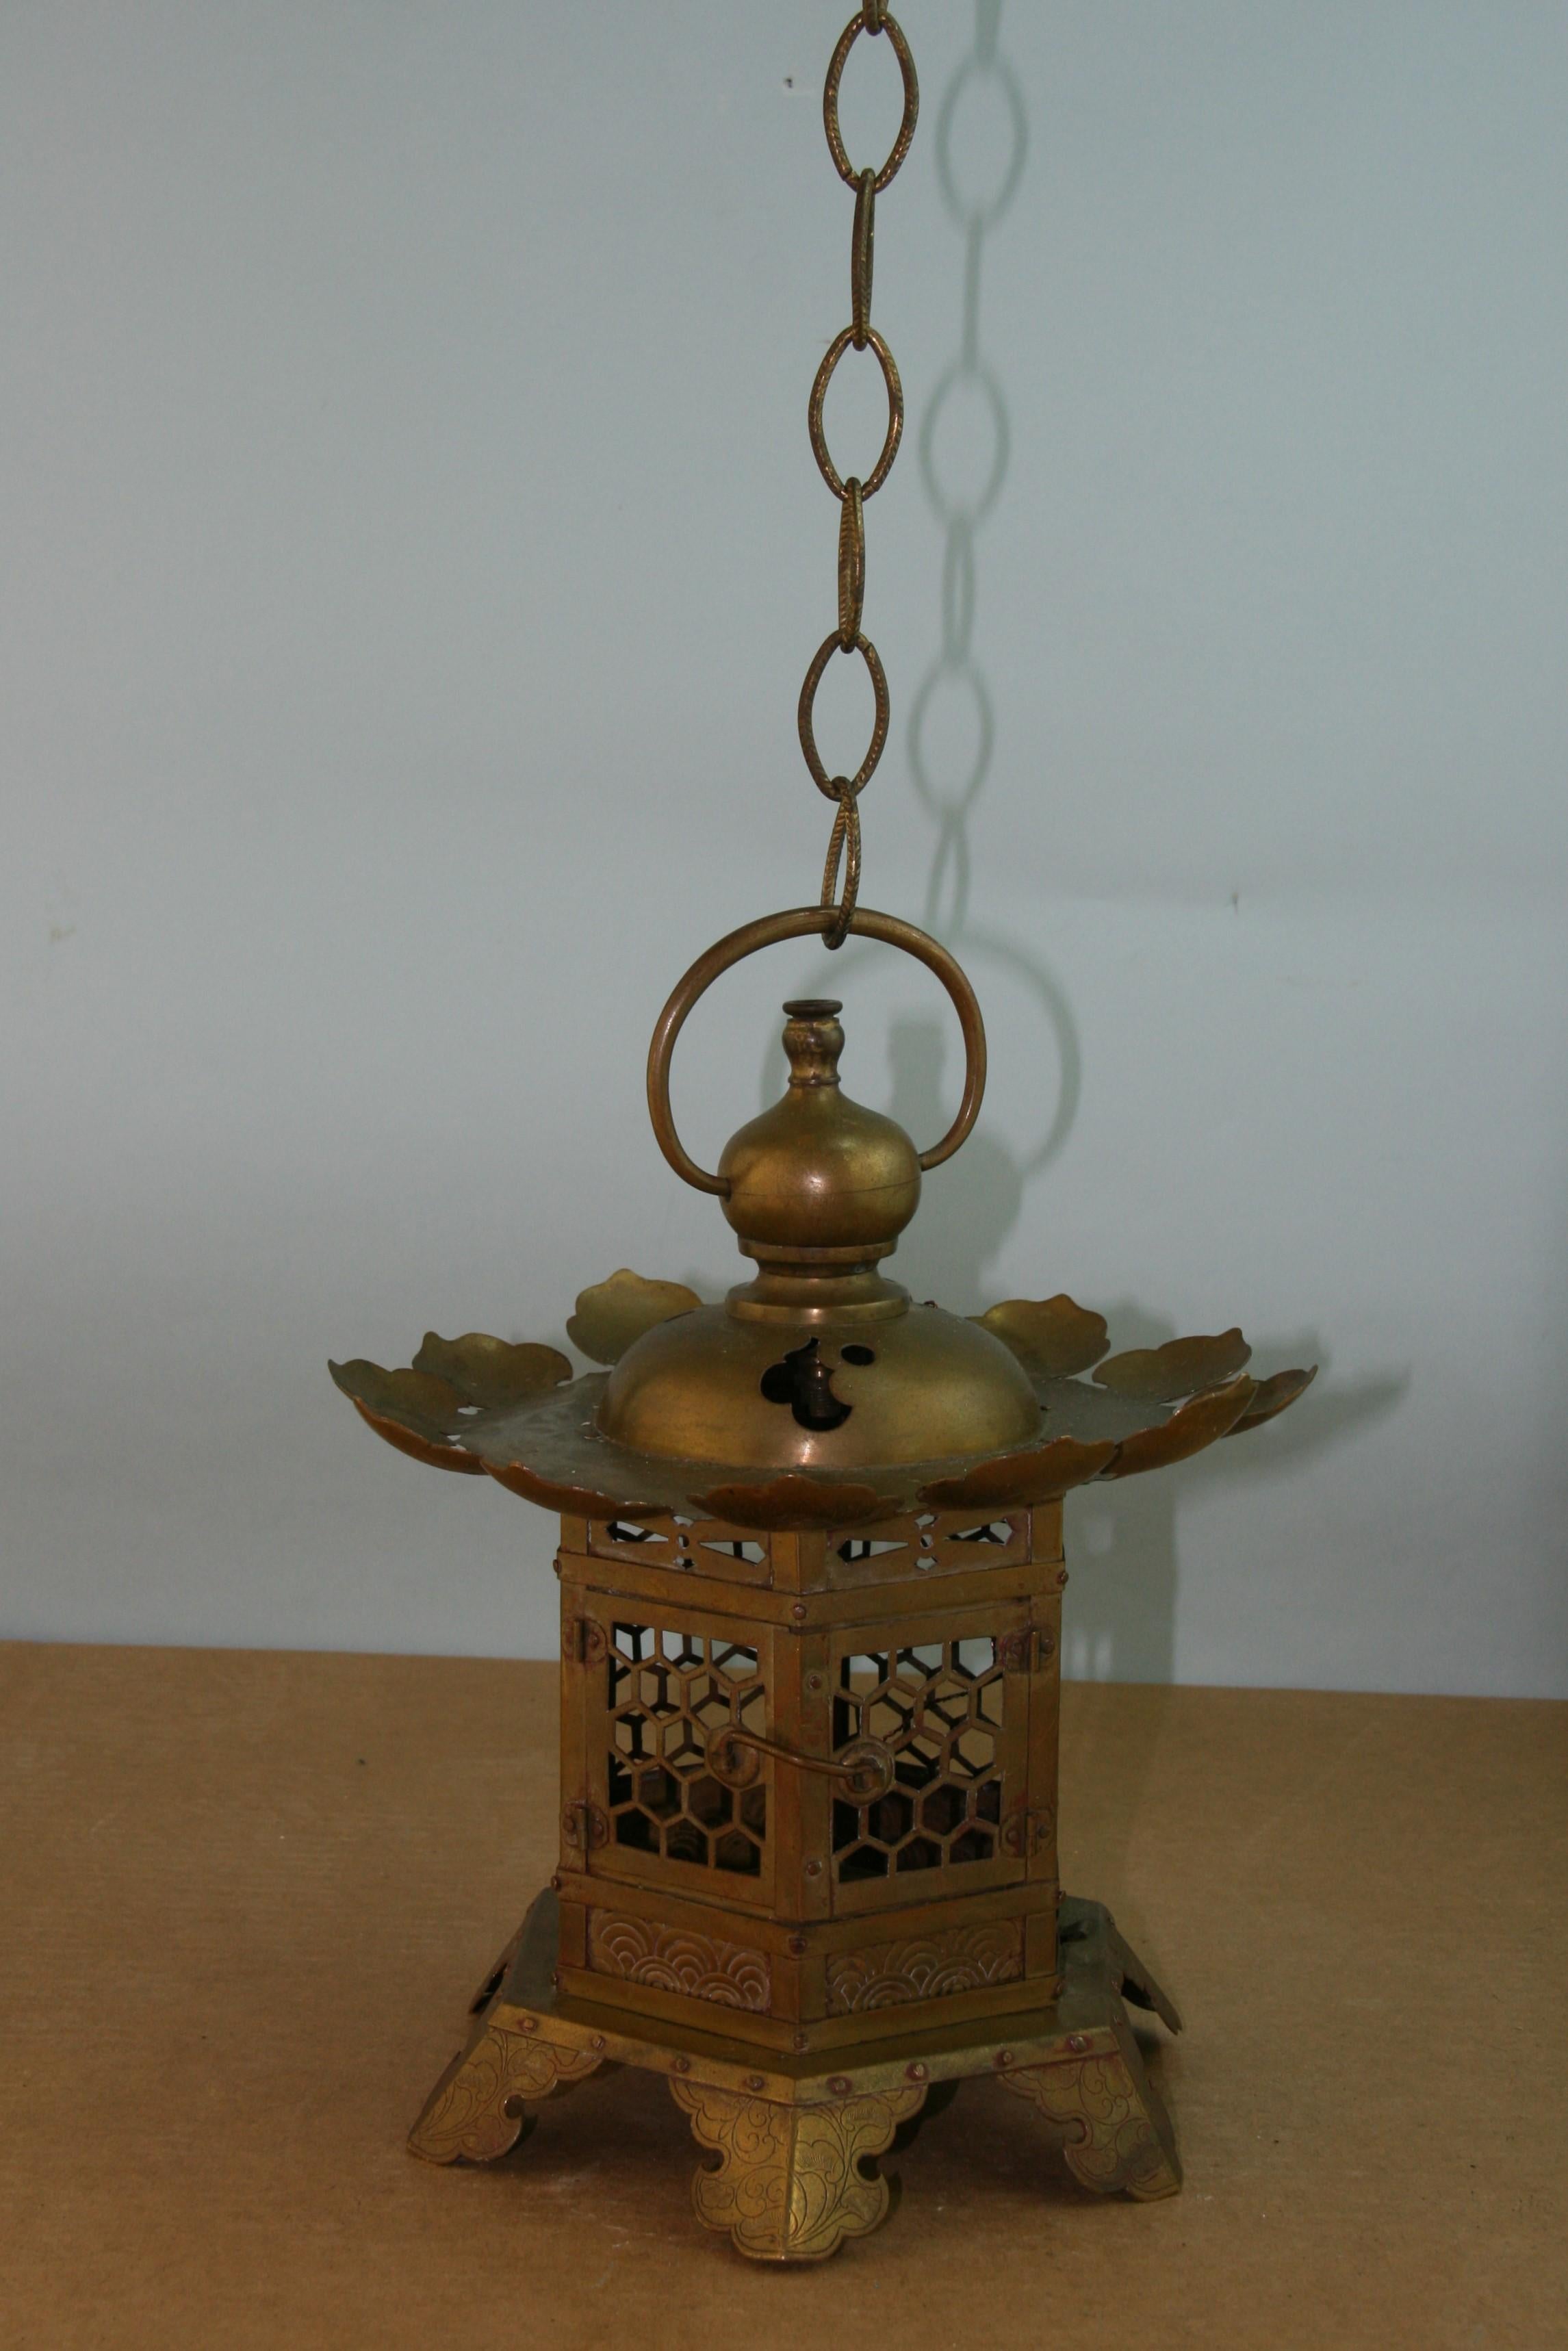 Japanese Lotus Flower Brass Garden Candle Lantern with Chain In Good Condition For Sale In Douglas Manor, NY